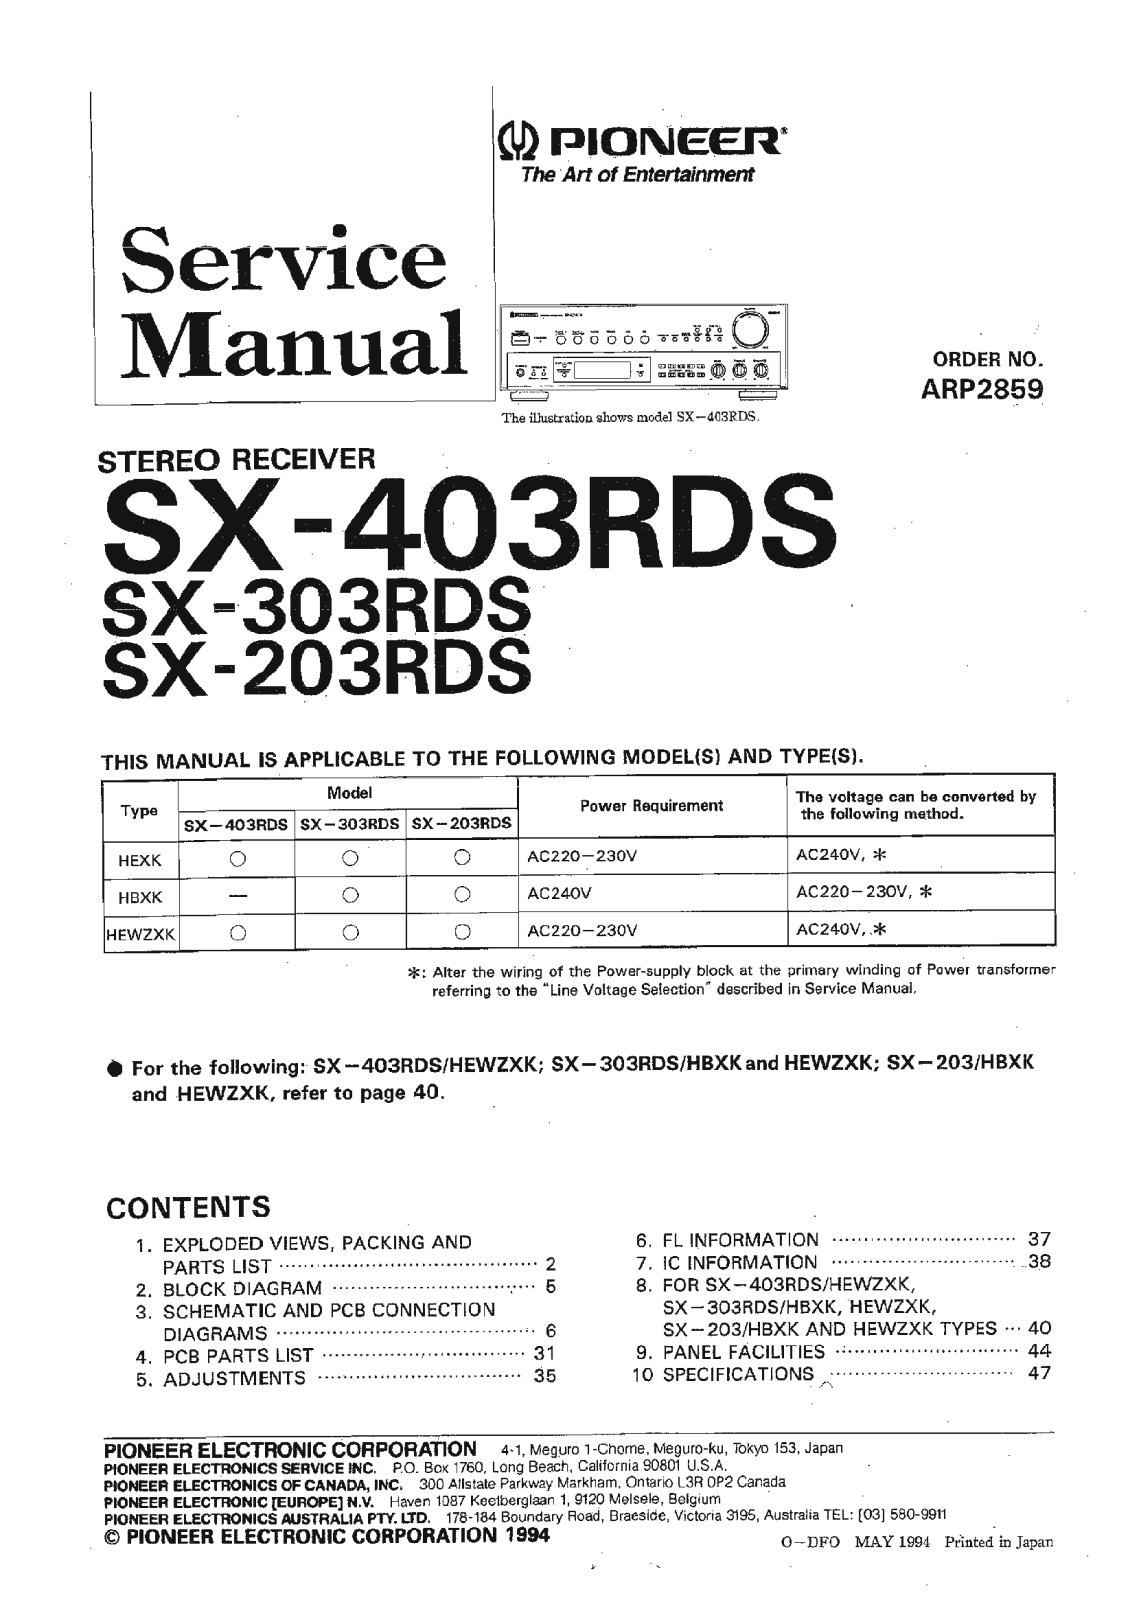 Pioneer SX-303RDS Service Manual